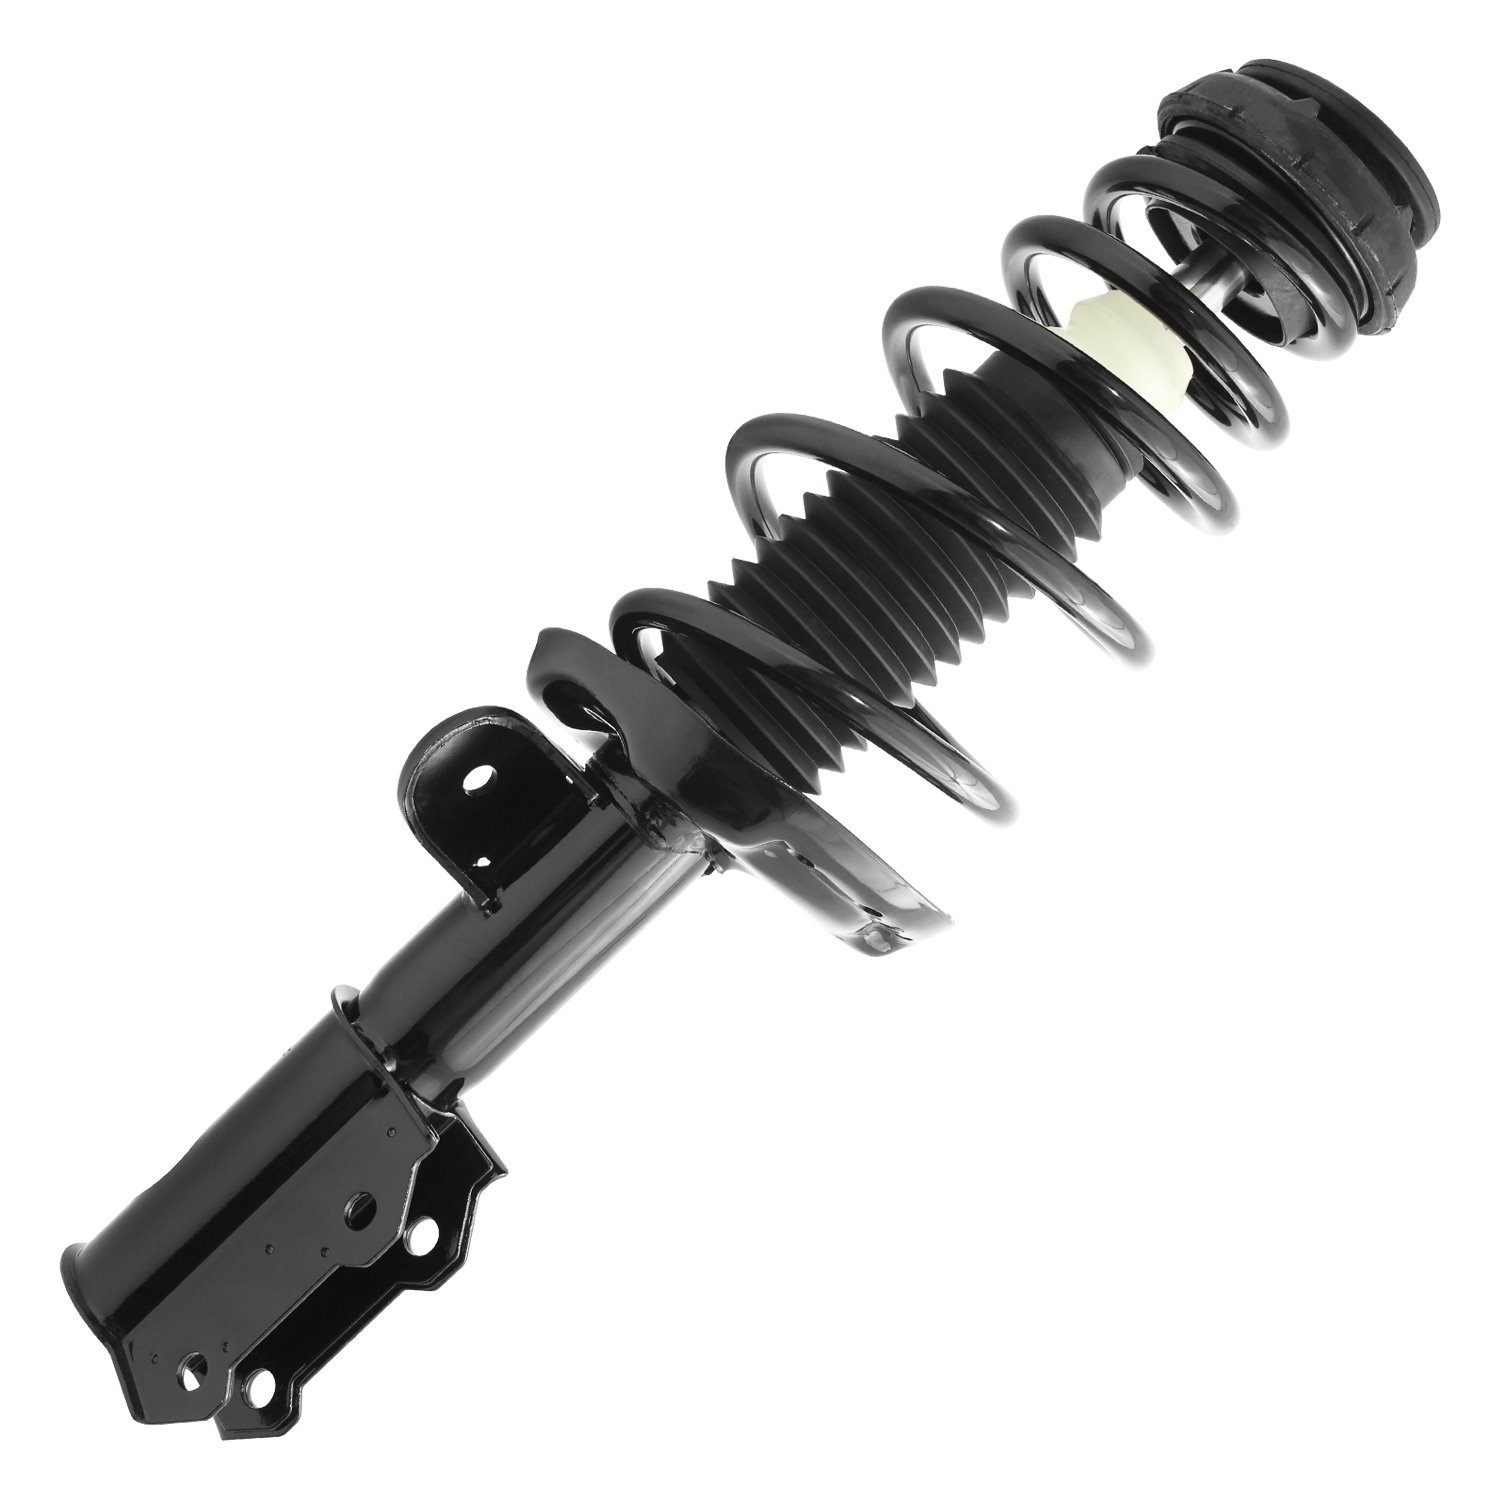 11886 Suspension Strut & Coil Spring Assembly Fits Select Chevy Cruze